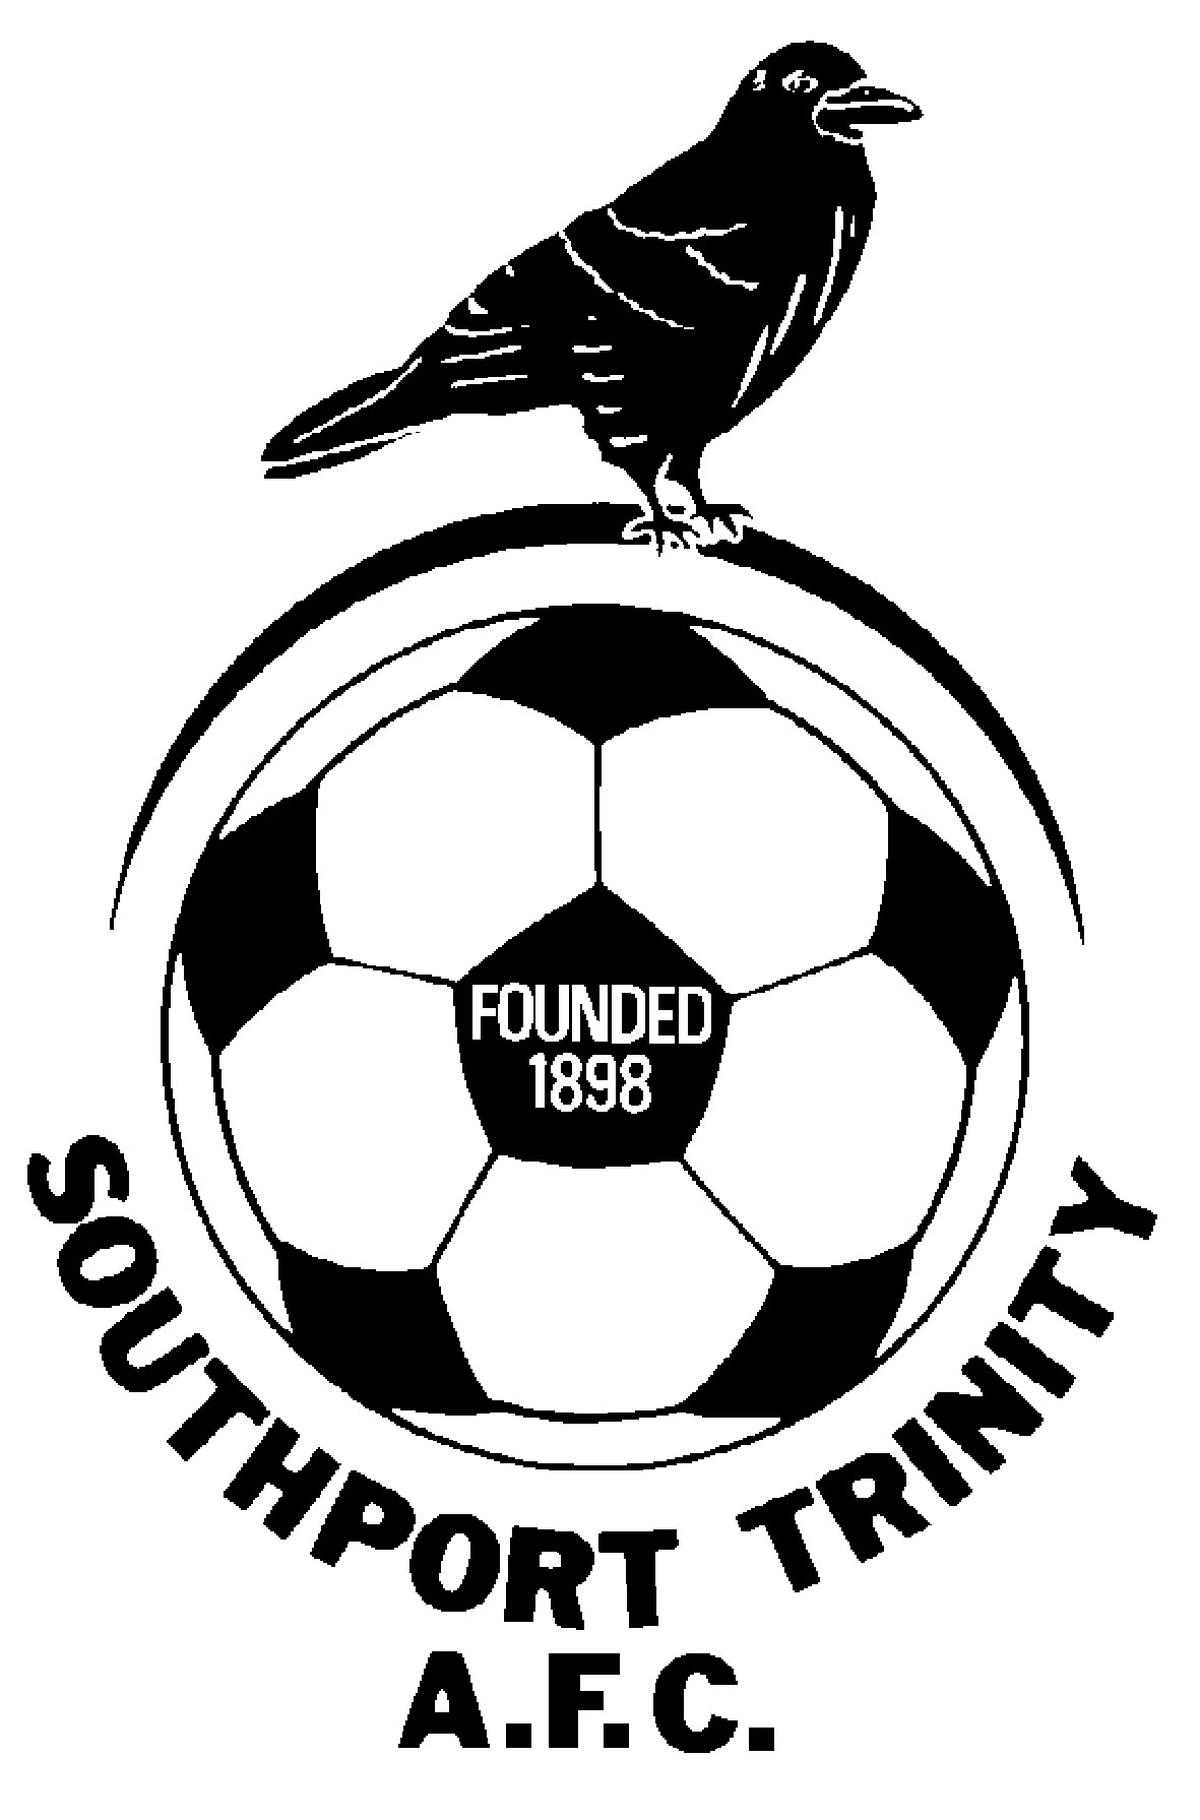 Southport F.C. Wallpapers